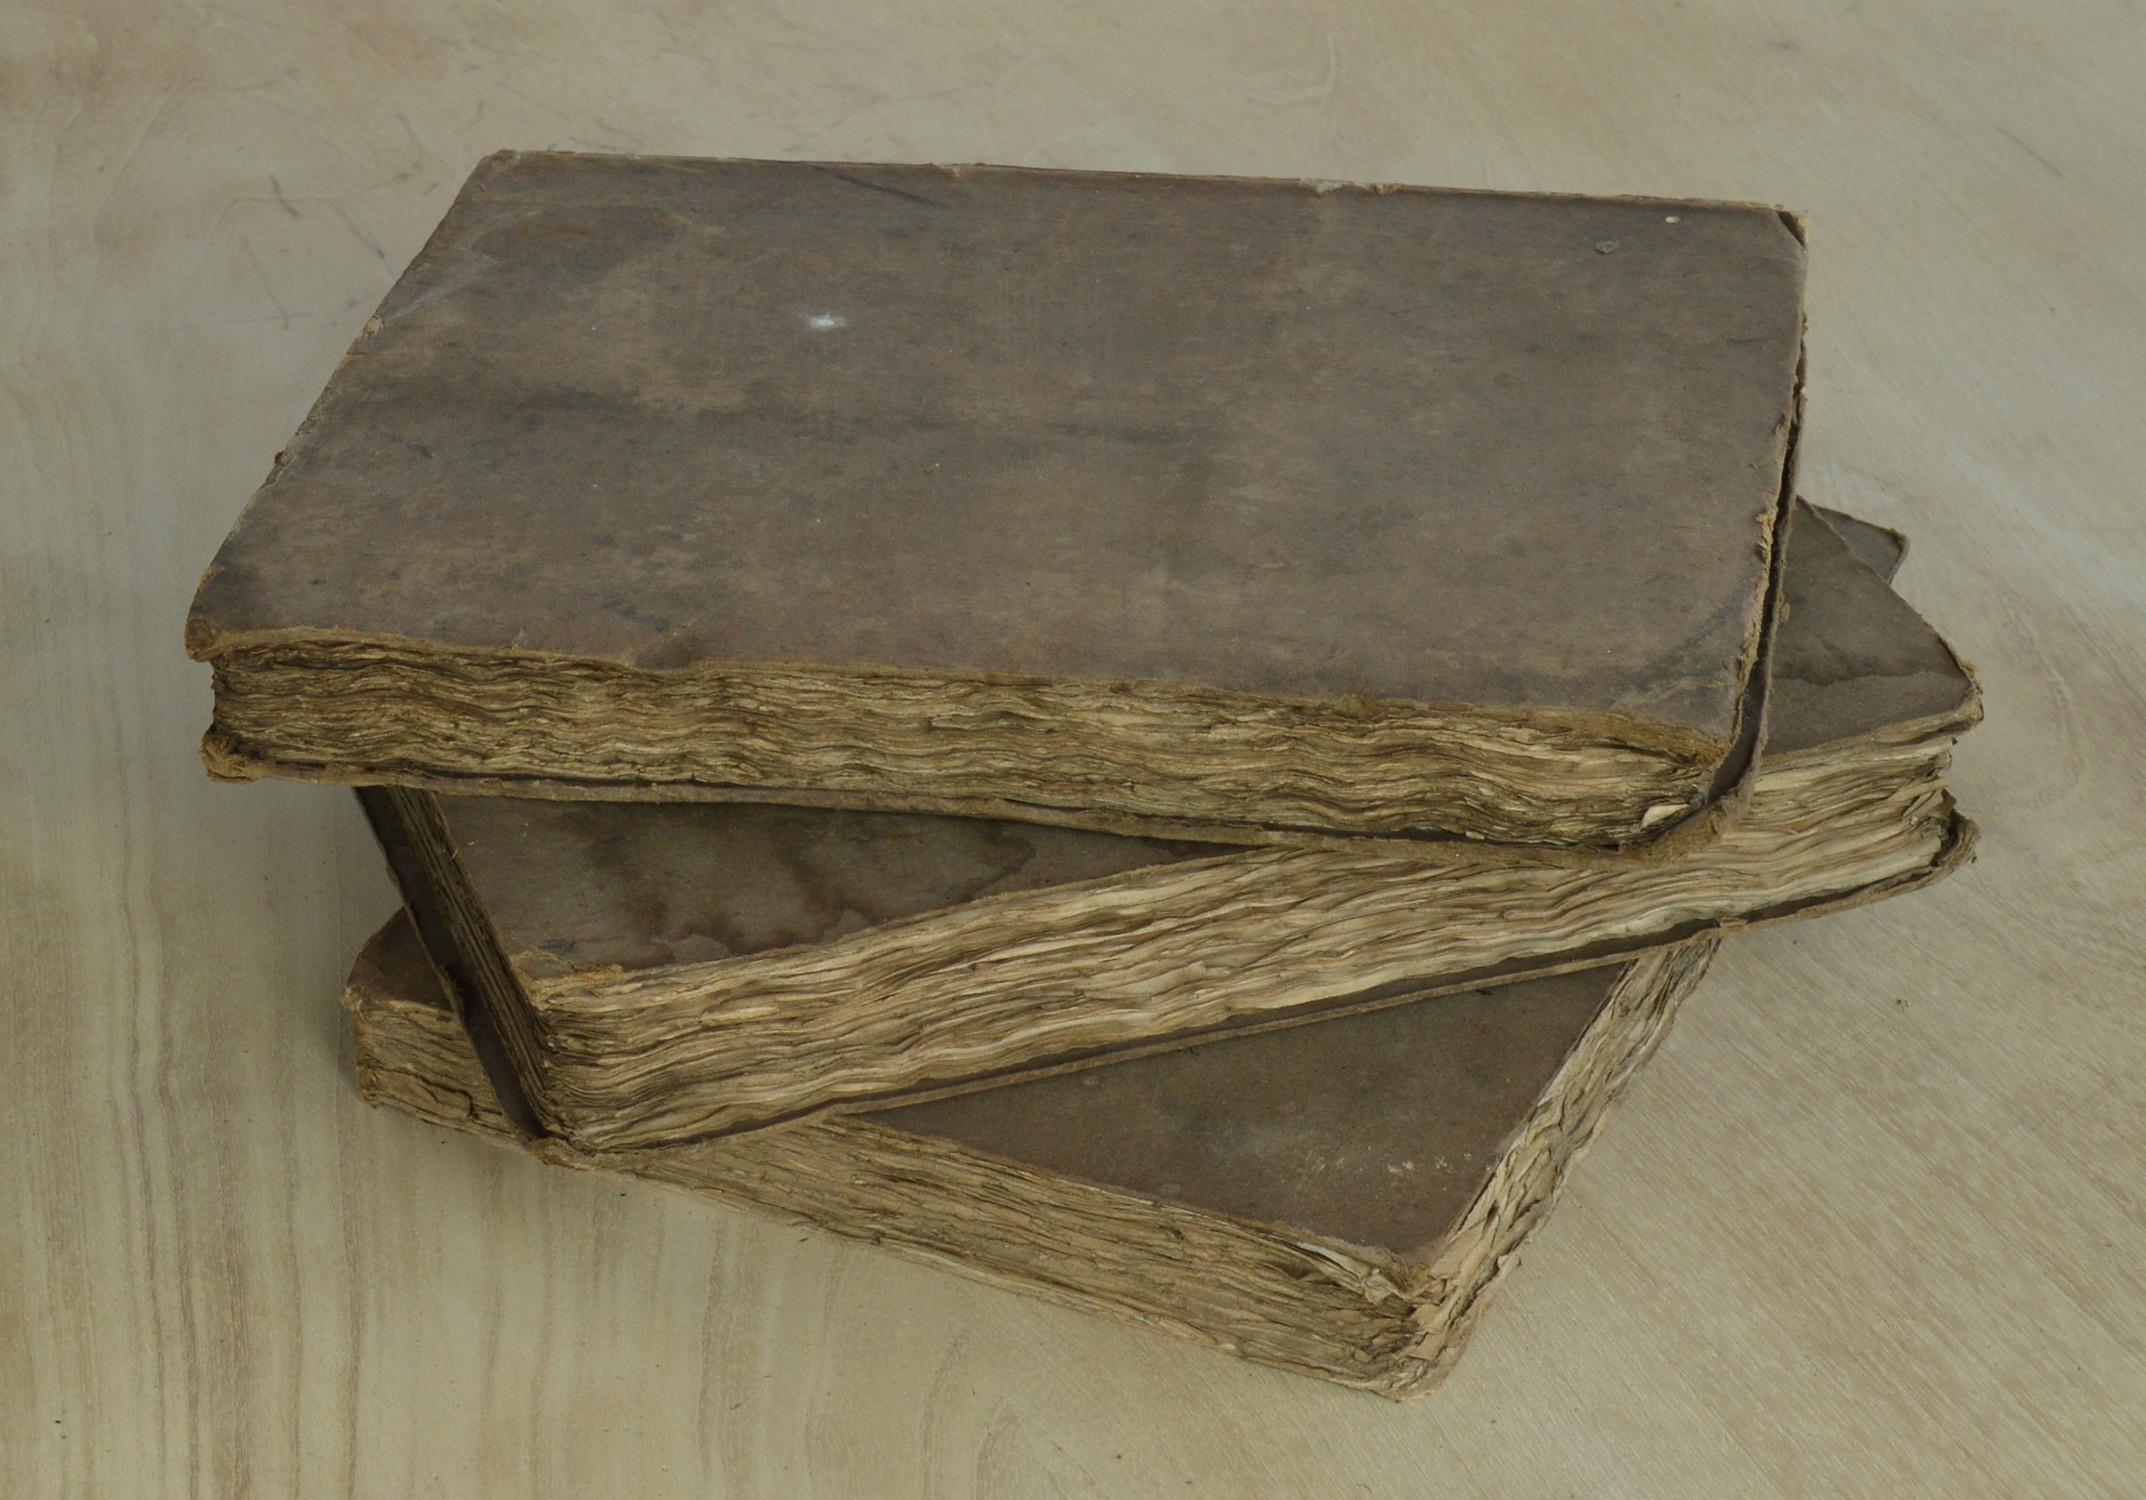 Set of 3 Antique Early 19th Century Distressed Books with Earth Colour Bindings (Georgian)